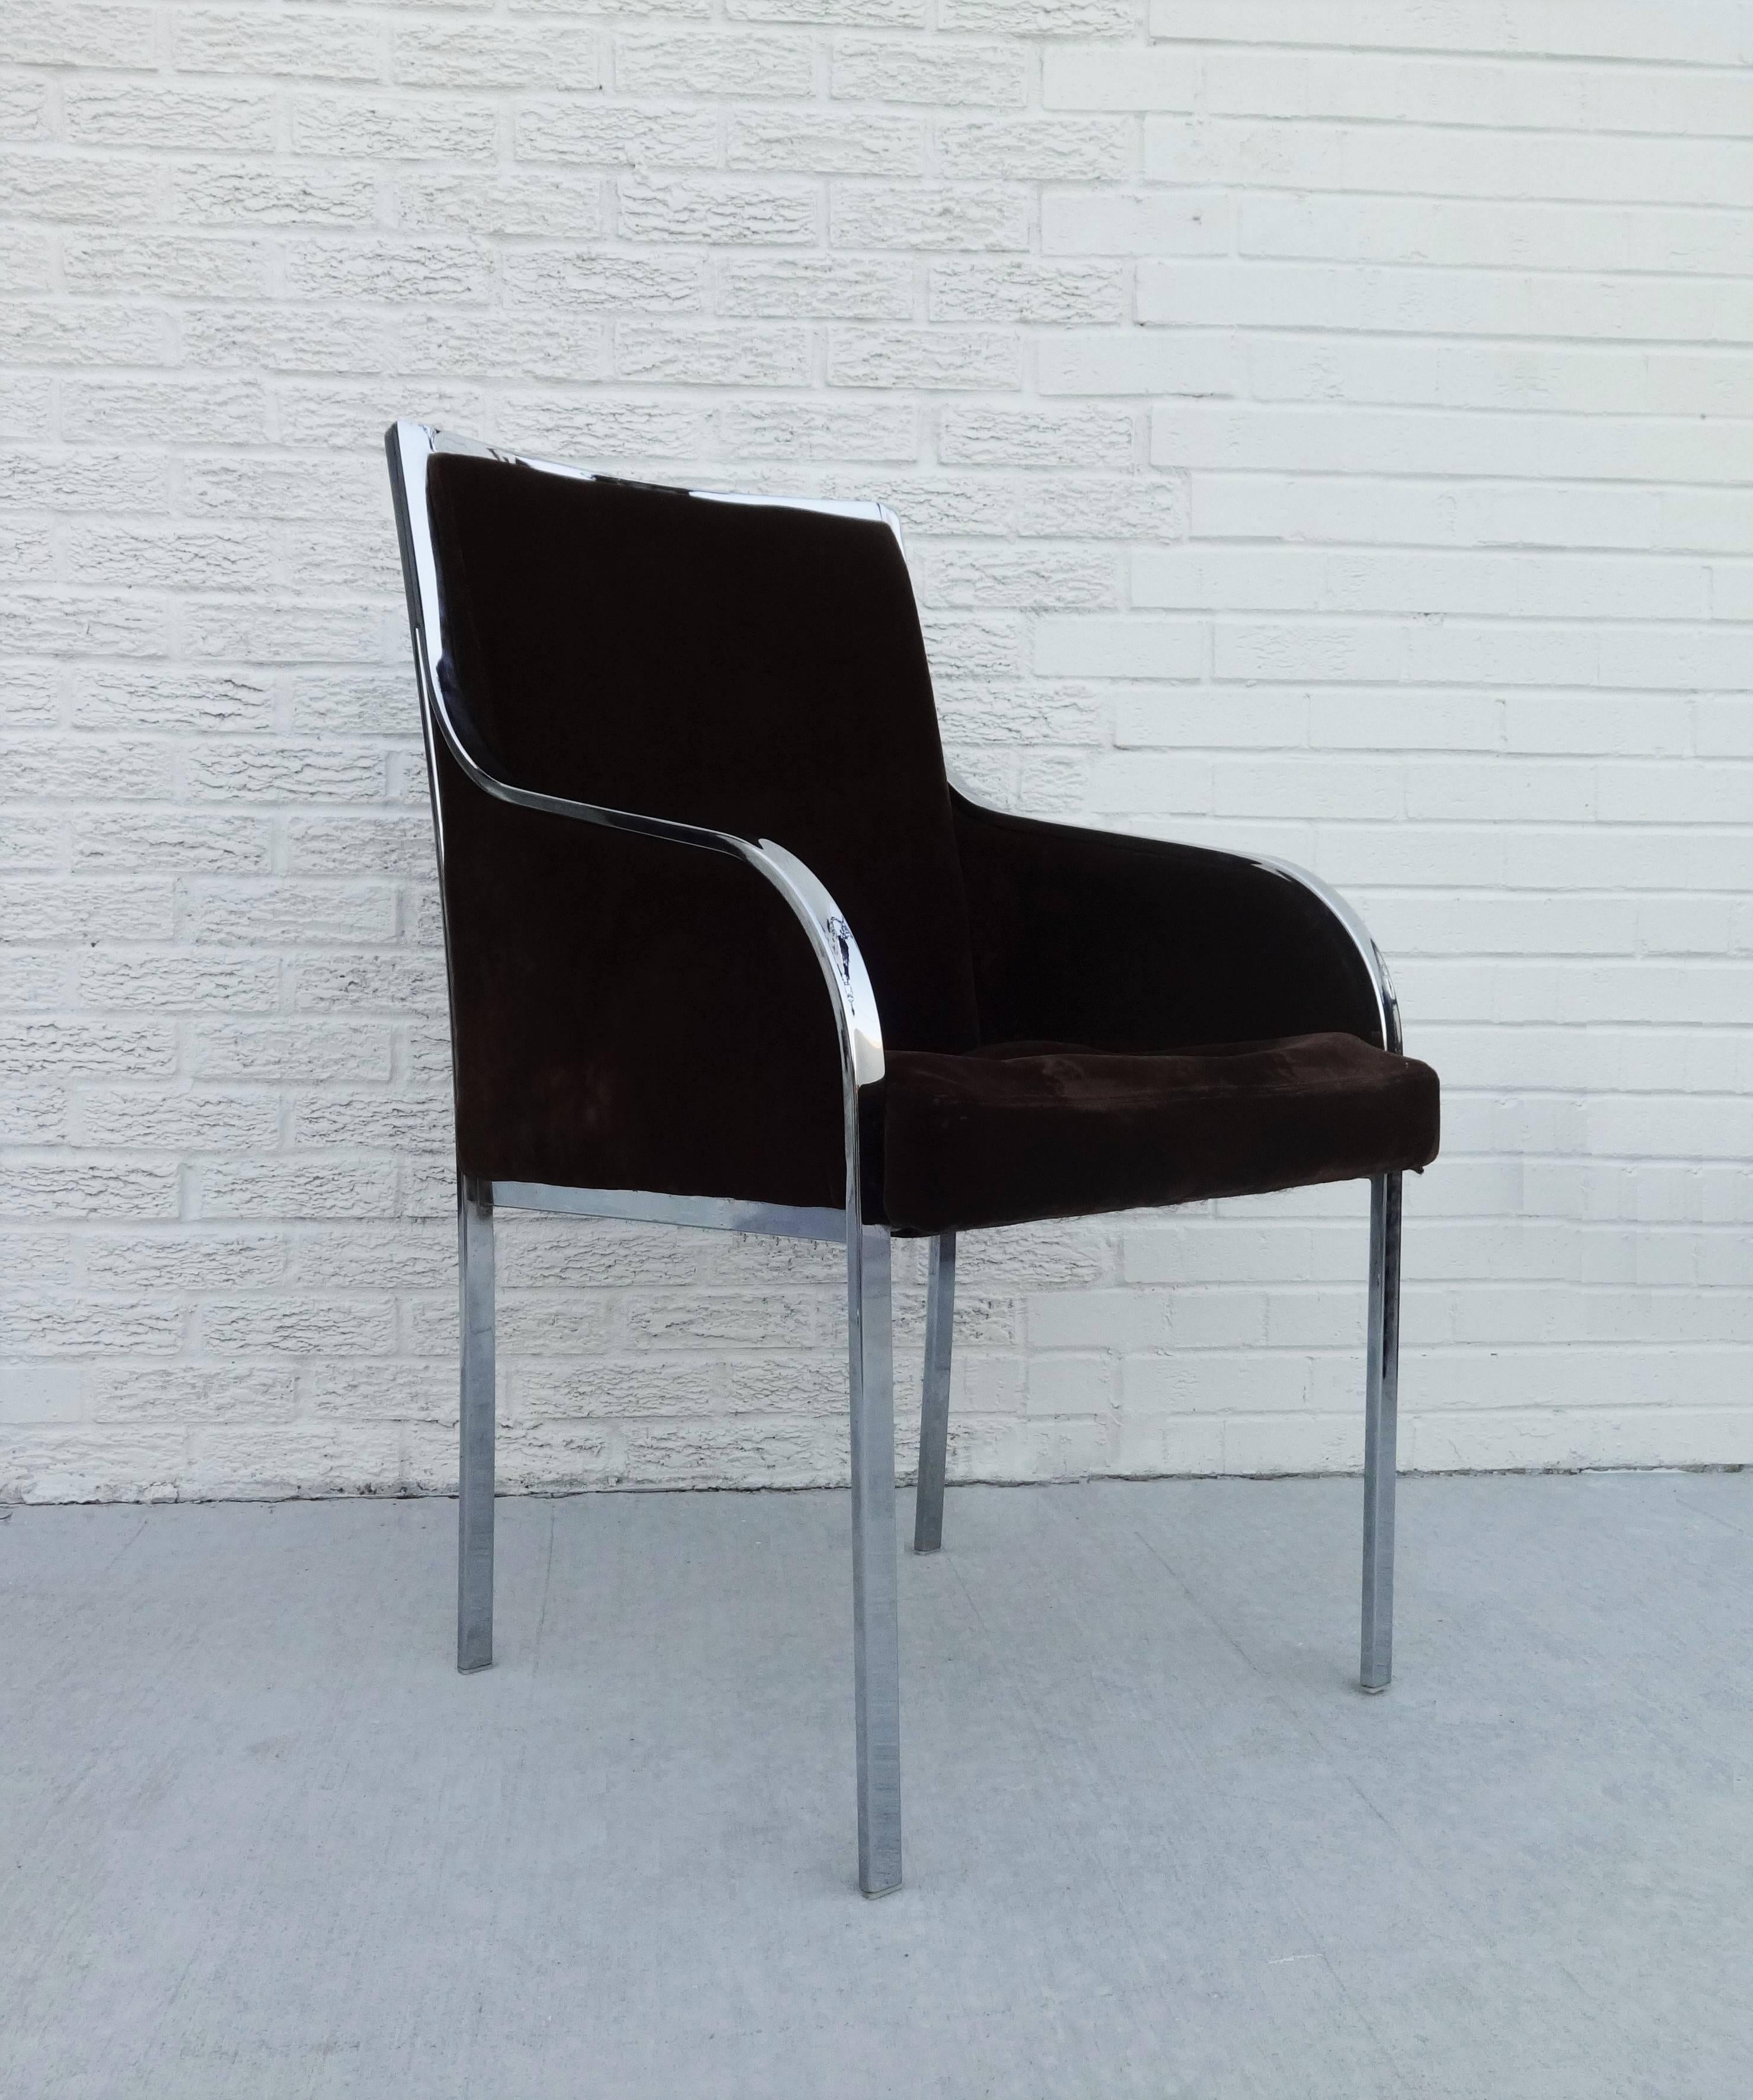 1970s beautiful set of six chrome frame dining chairs by Dillingham in the style of Milo Baughman are ready to be reinvented. Featuring chrome frame dining chairs with dark brown color upholstery. There are two arm chairs and four side chairs. The